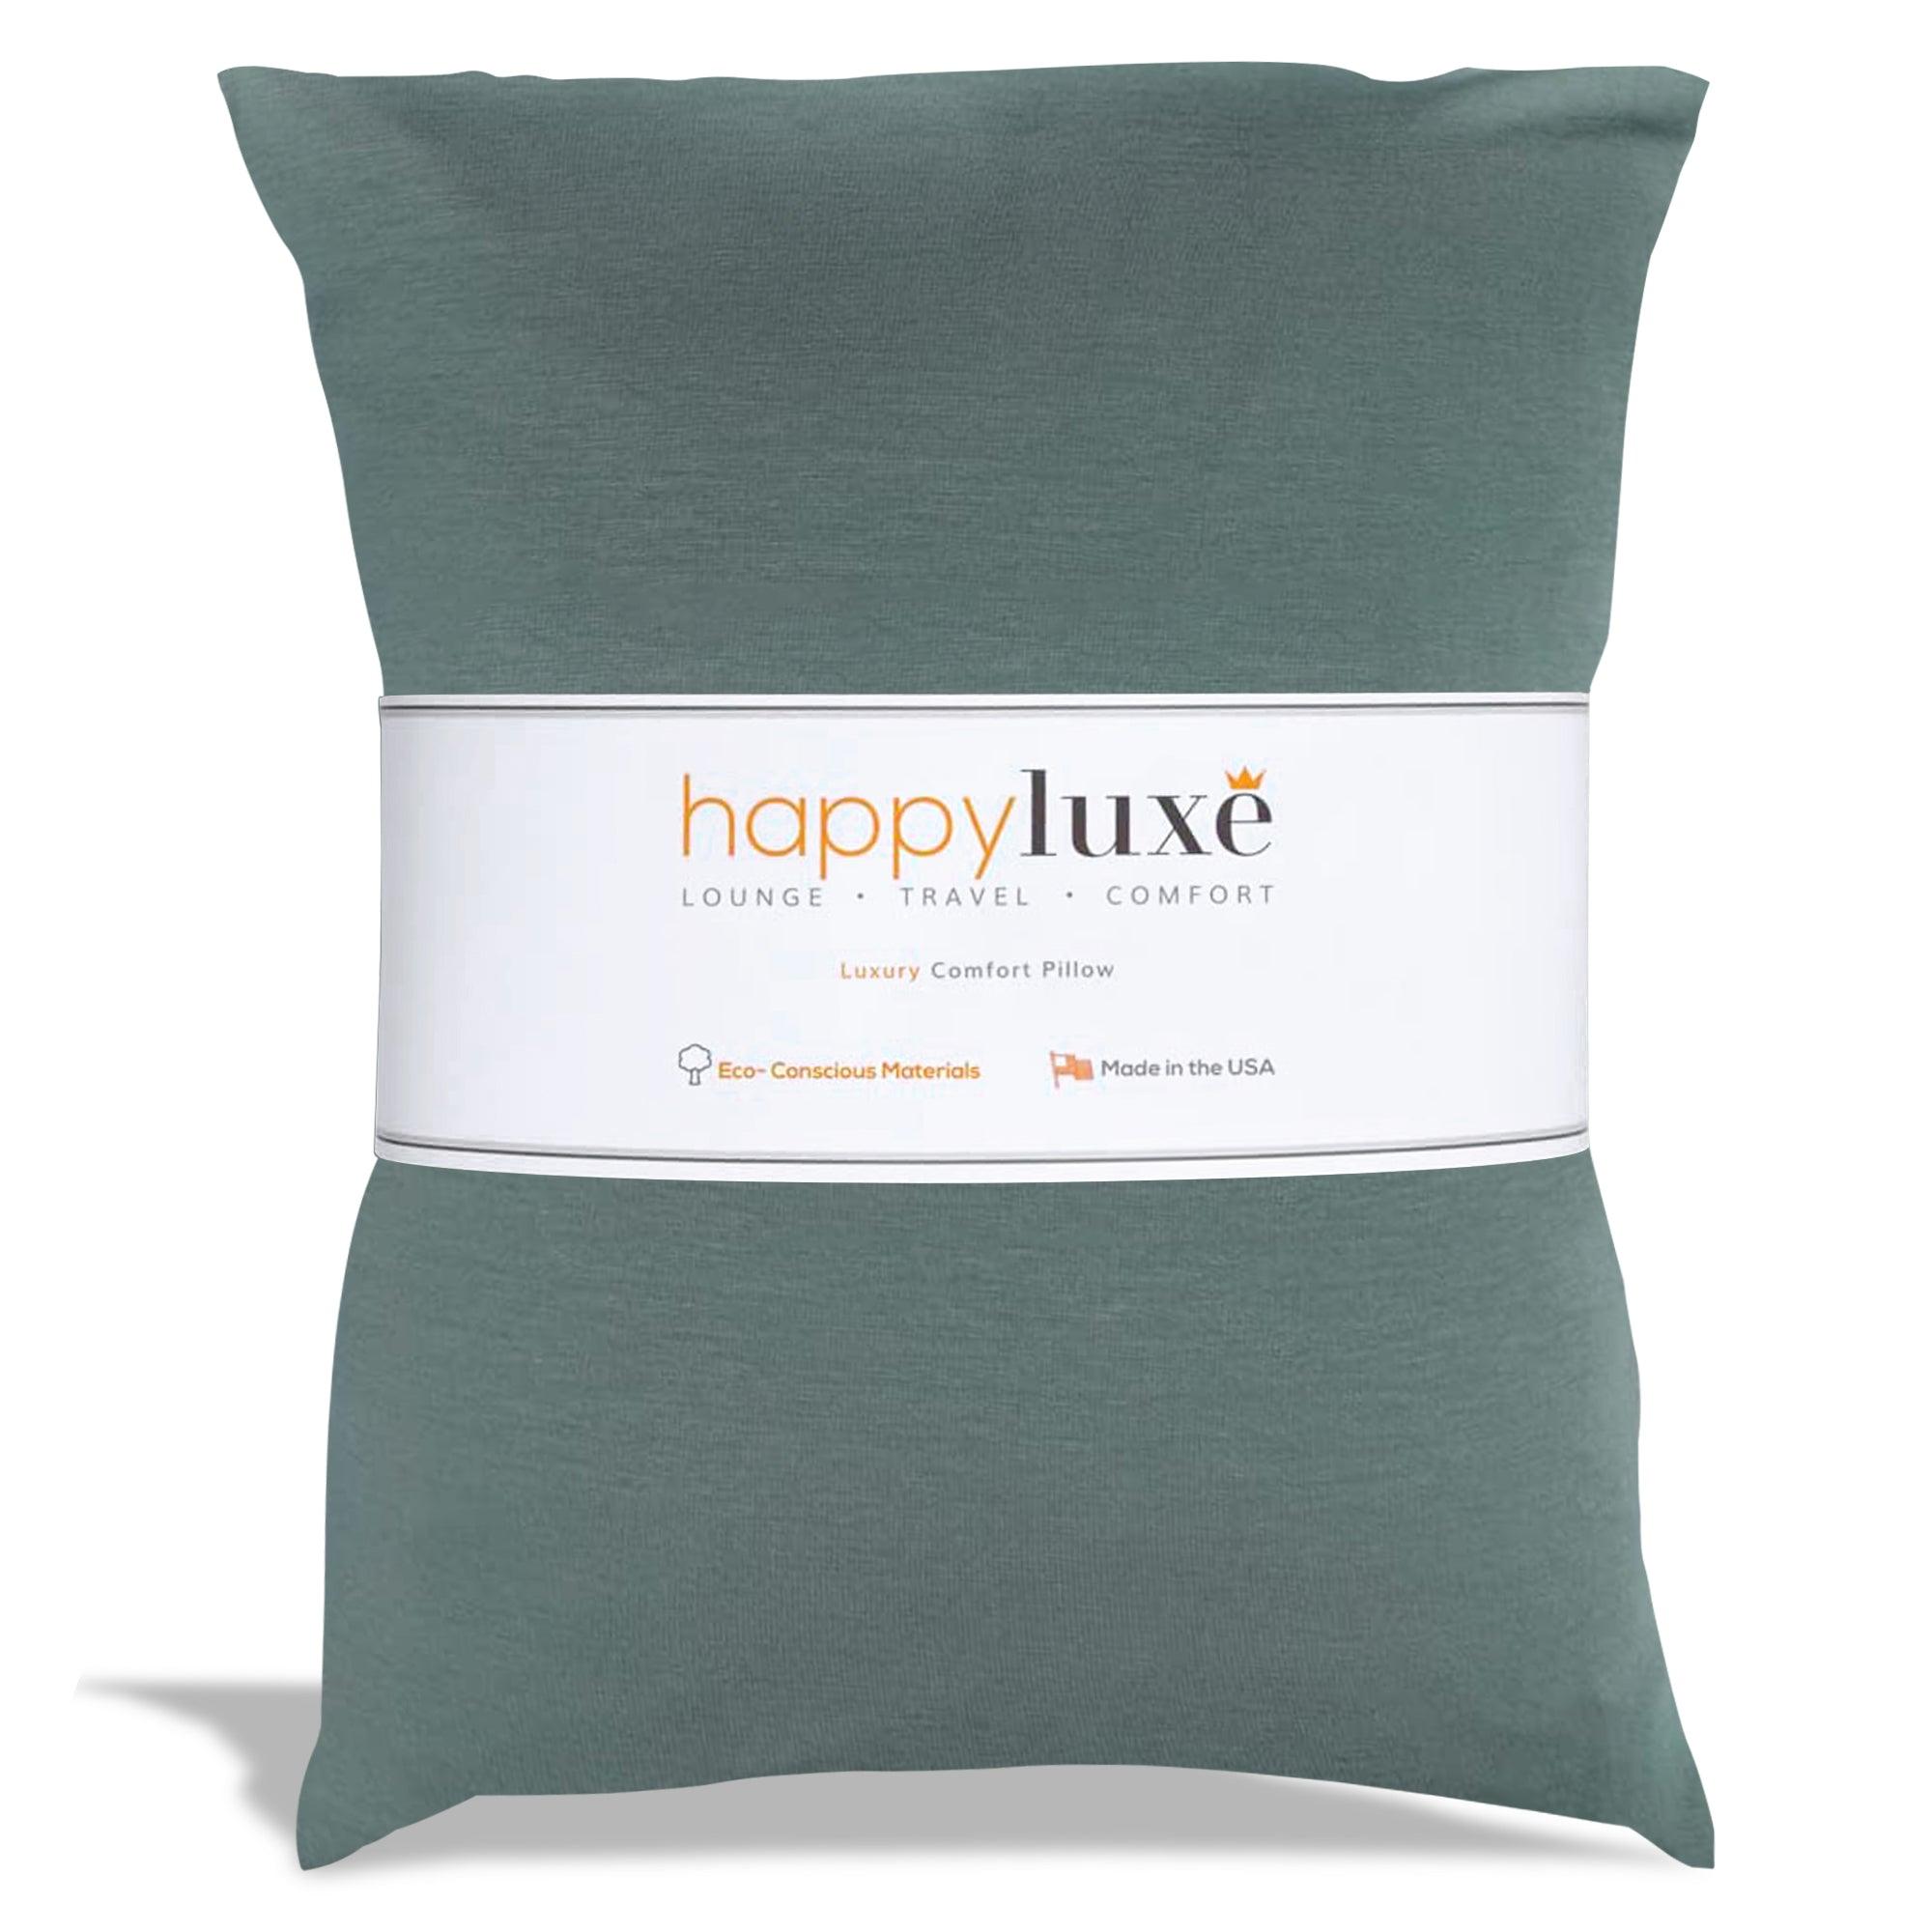 Odyssey Travel Pillow in Sage Green - HappyLuxe